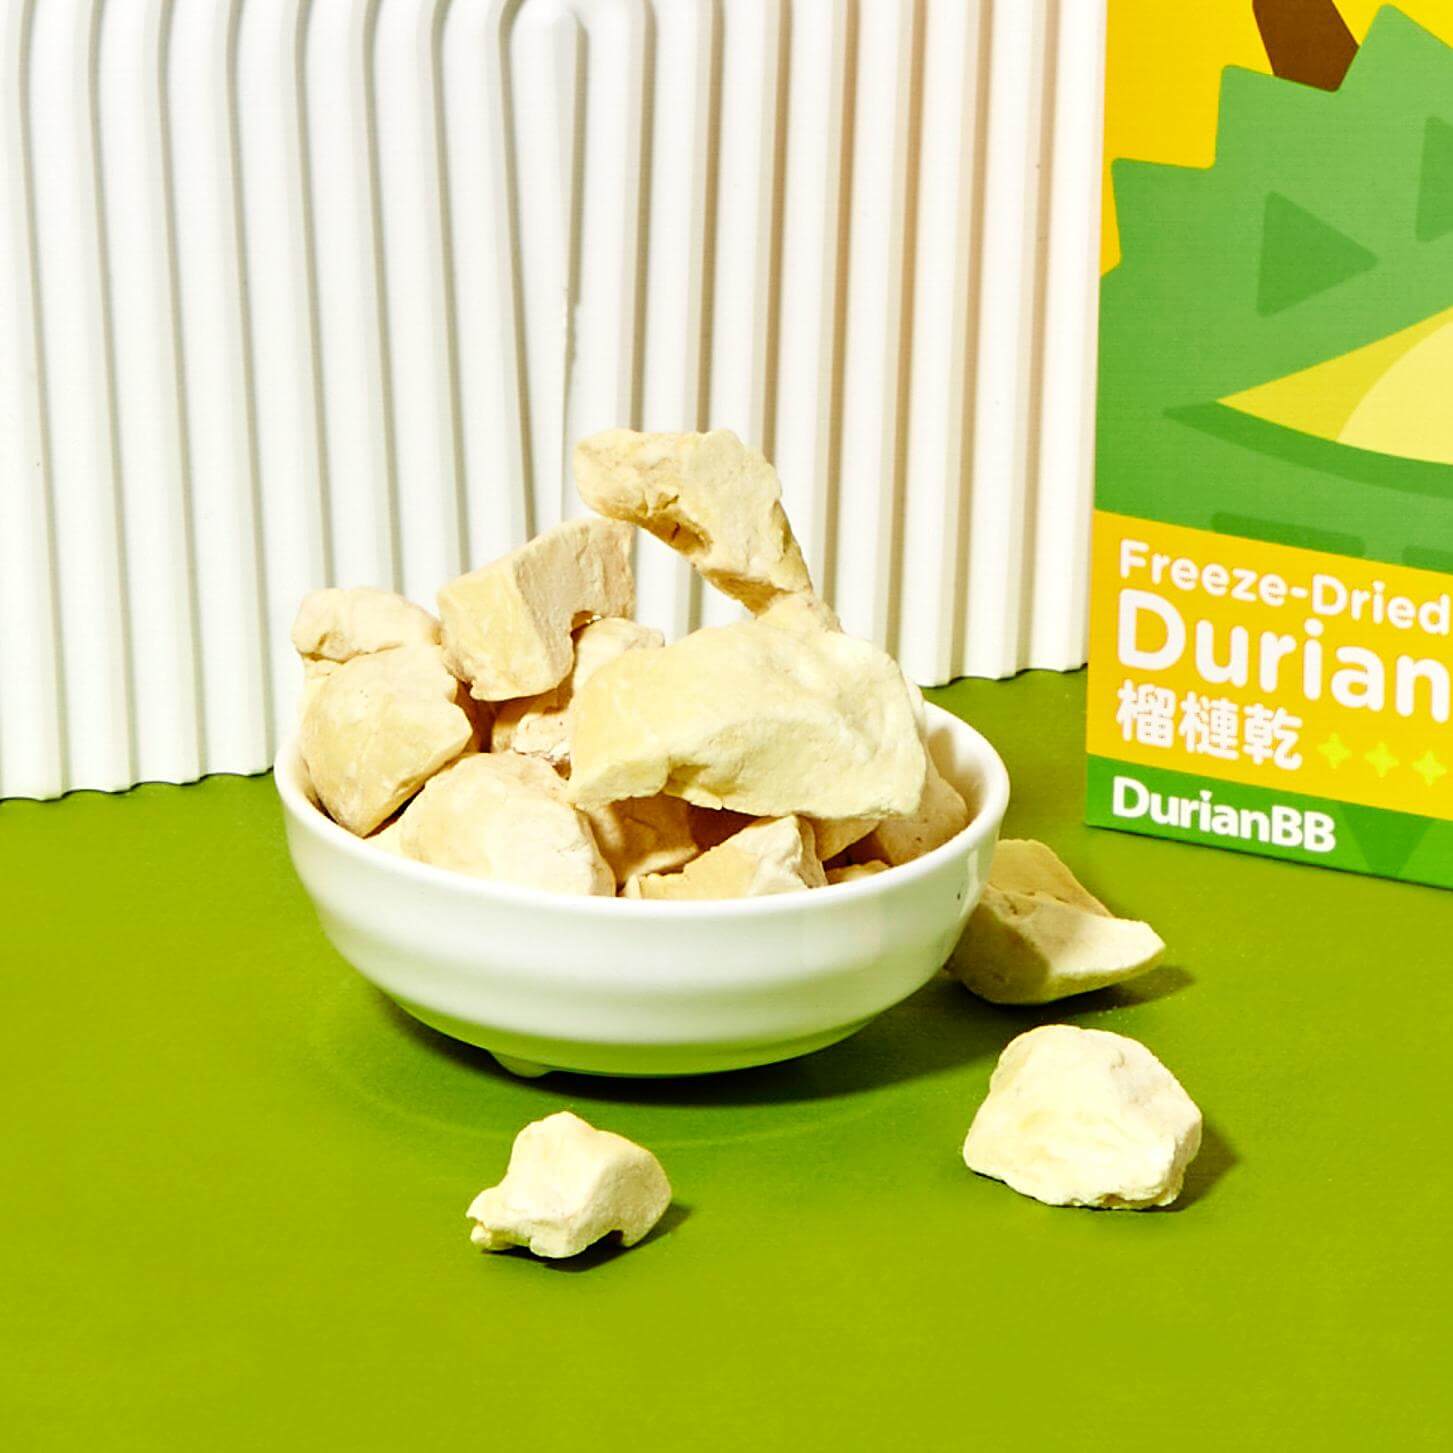 freeze dried durian as durian gift in a bowl